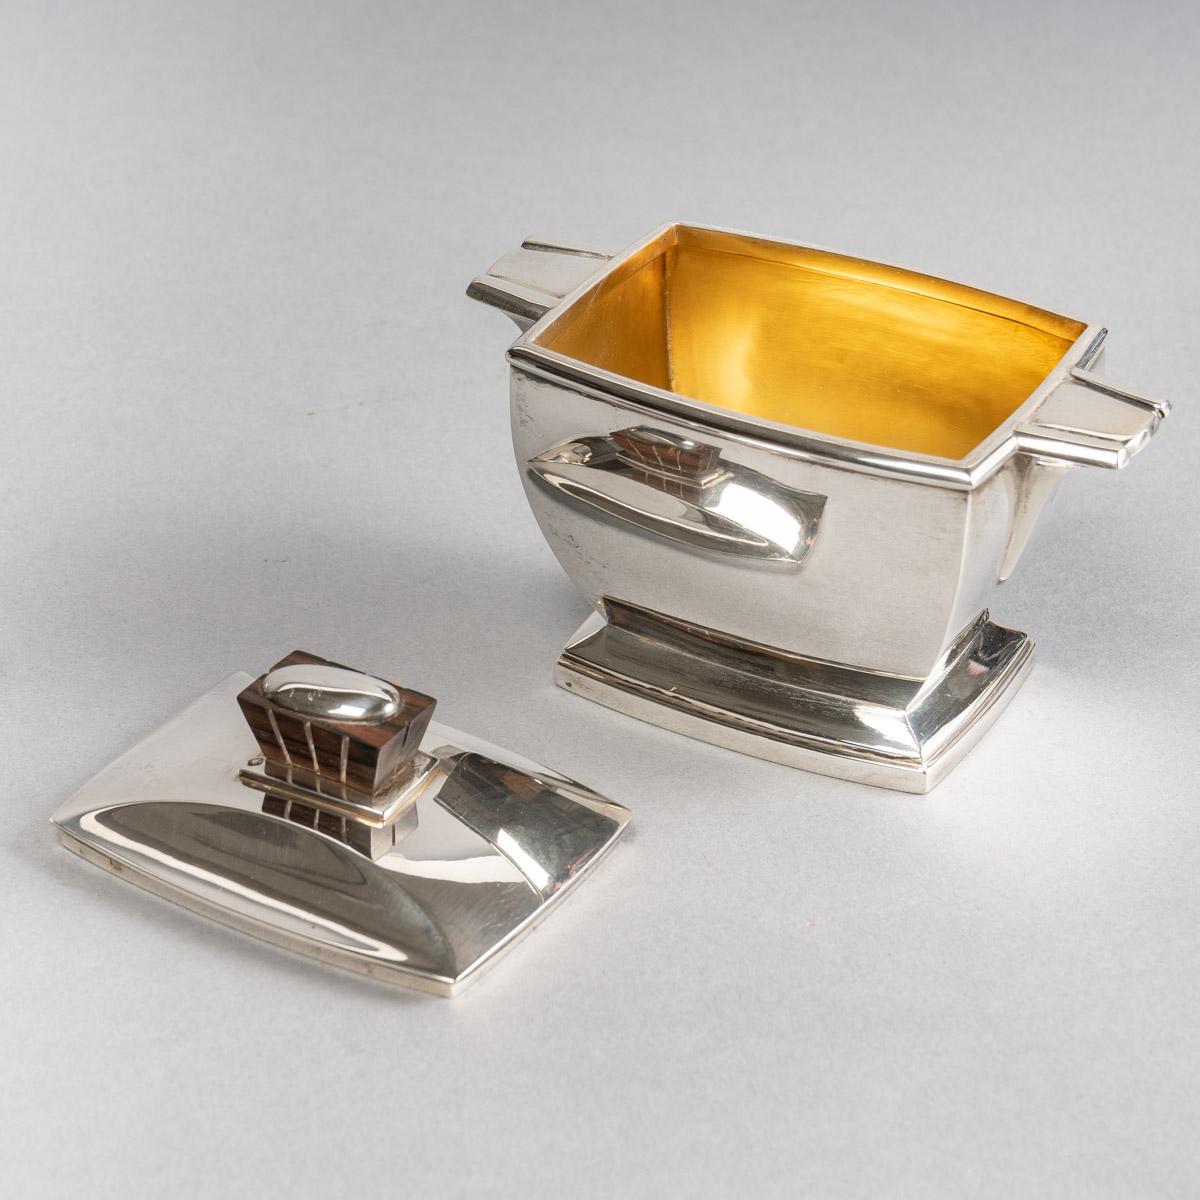 1920 Boin Taburet - Tea And Coffee Egoiste Set In Sterling Silver And Macassar For Sale 4